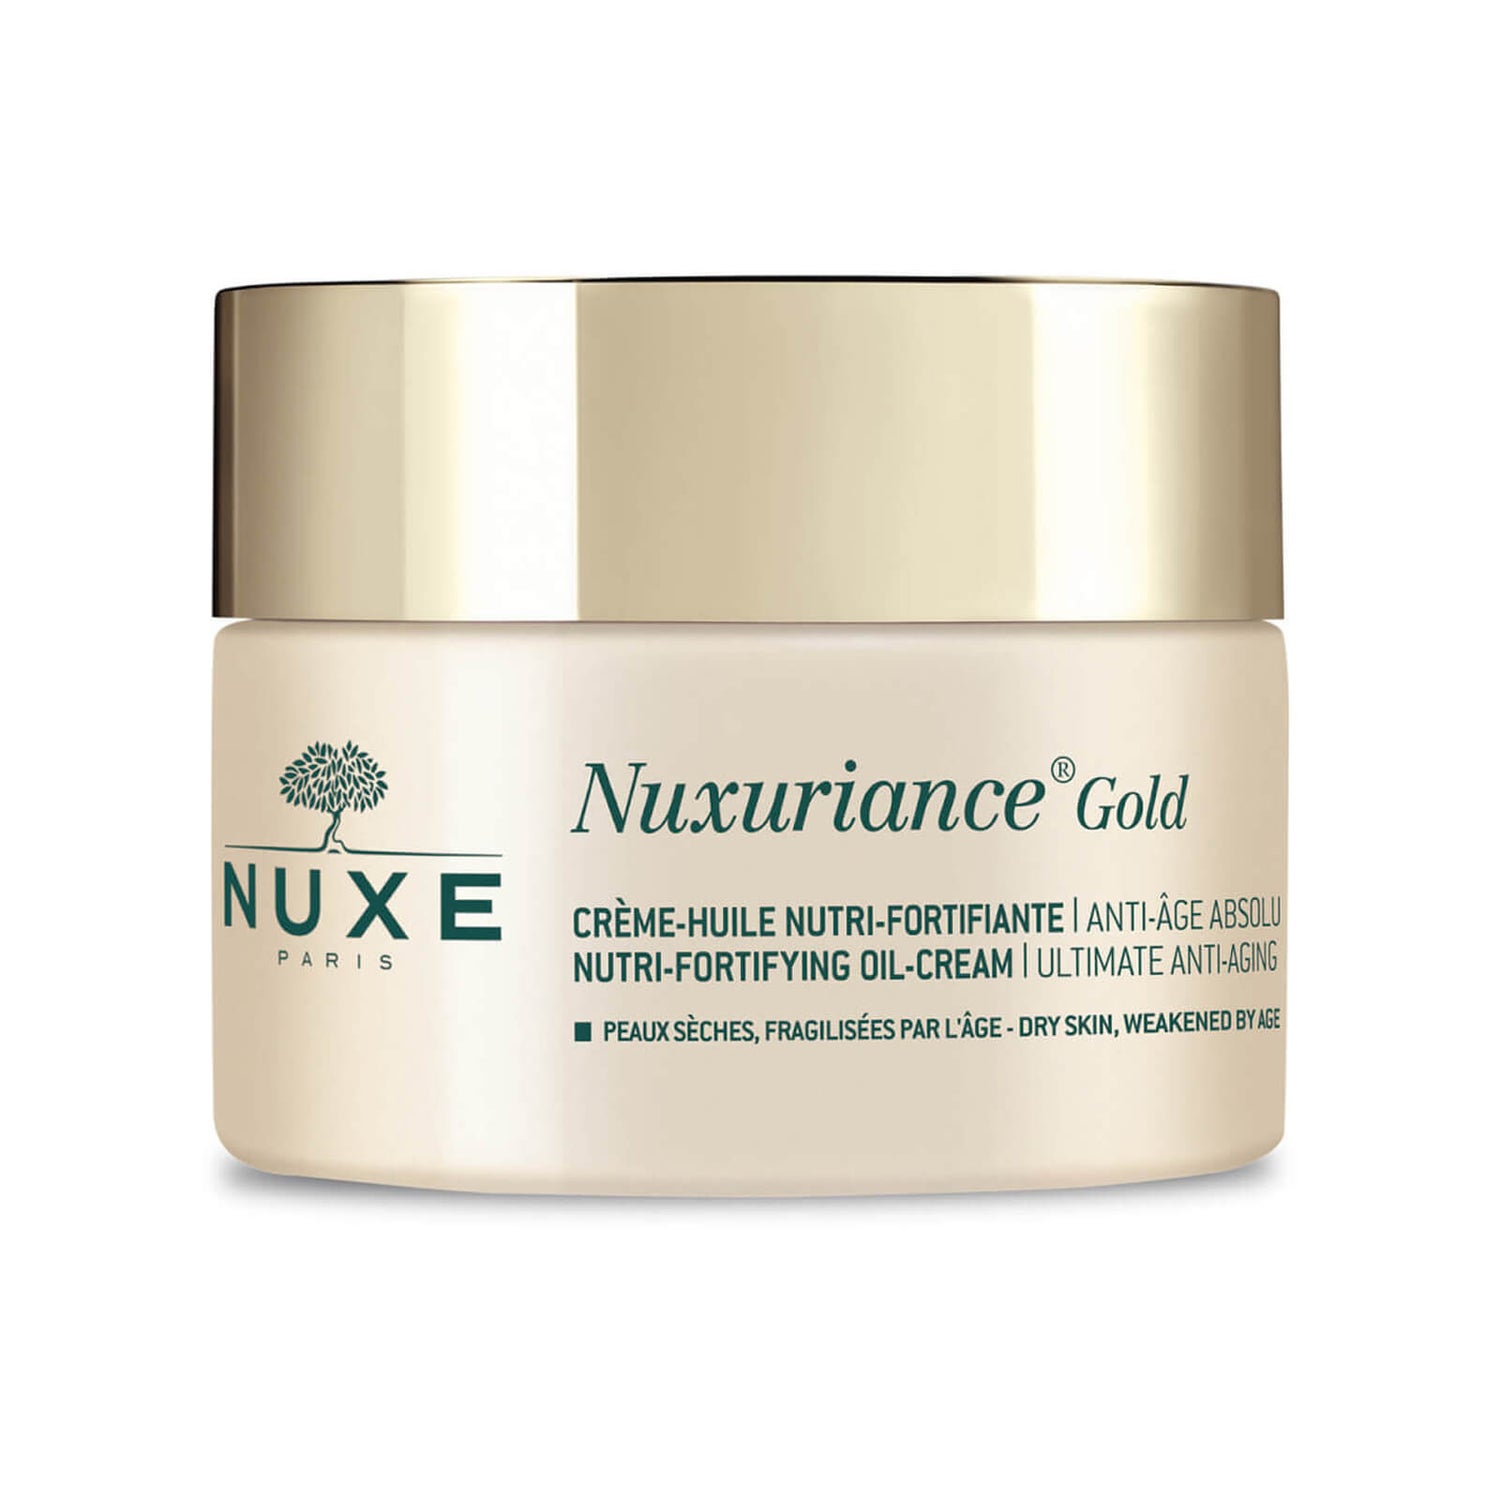 Crème-Huile Nutri-Fortifiante, Nuxuriance Gold 50 ml